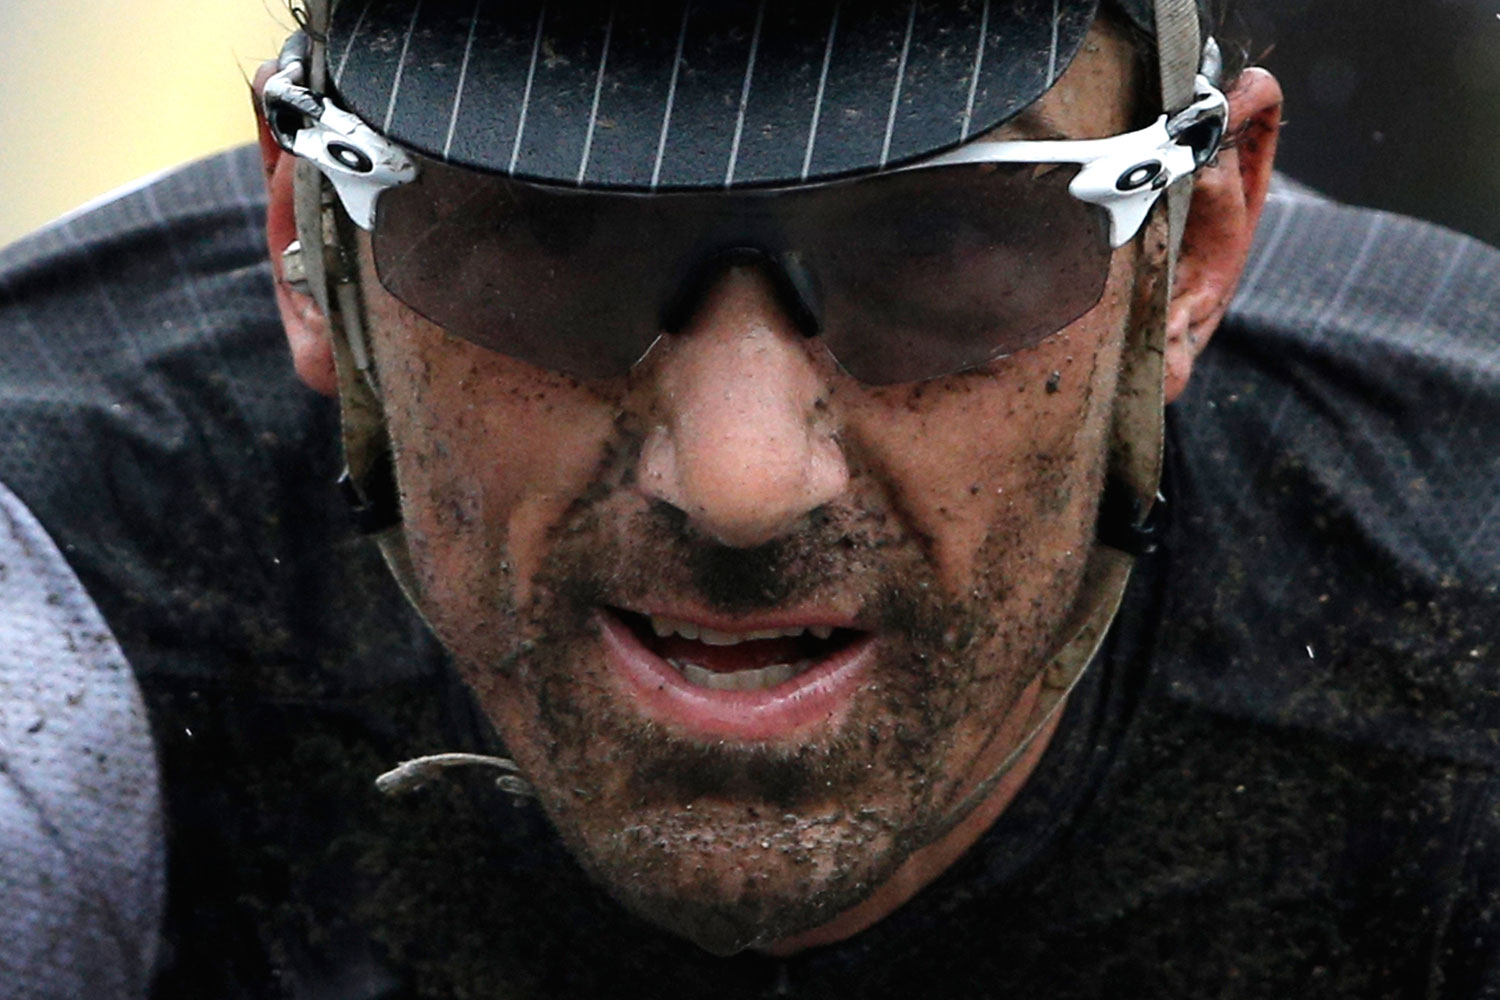 Switzerland's Fabian Cancellara crosses the finish line of the fifth stage of the Tour de France cycling race in Arenberg, France, on July 9, 2014.